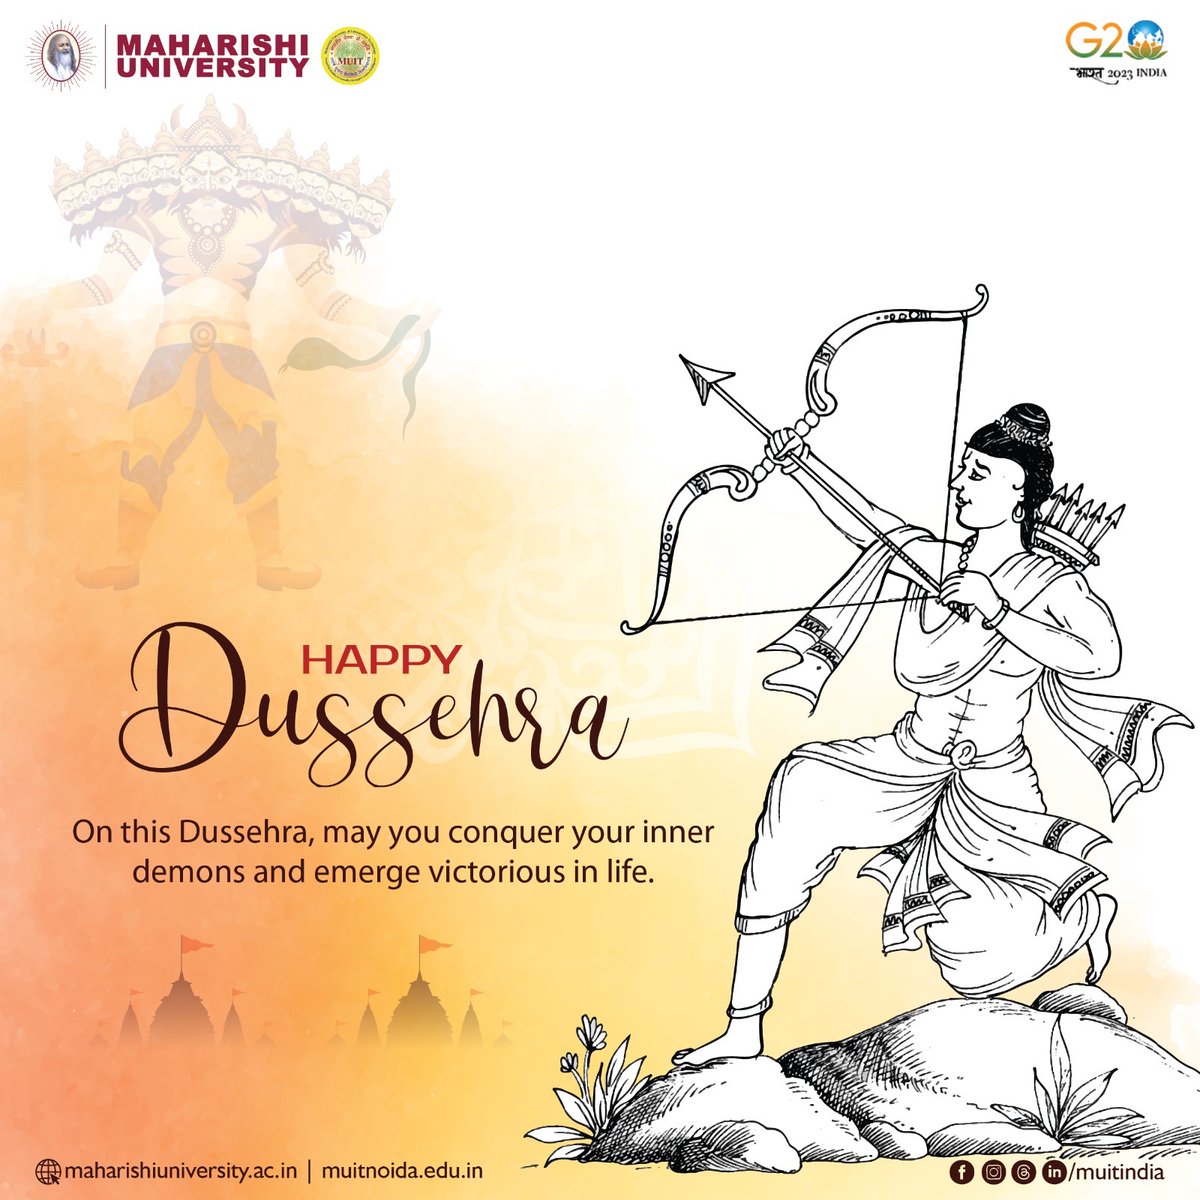 Happy Dussehra! 🎉

Celebrate the victory of good over evil.
Wishing you all a very happy & prosperous Dussehra from Maharishi University of Information Technology. 🙏✨

#HappyDussehra #FestivalOfVictory #dussehra2023 #Muitindia #maharishiuniversity #maharishimaheshyogi